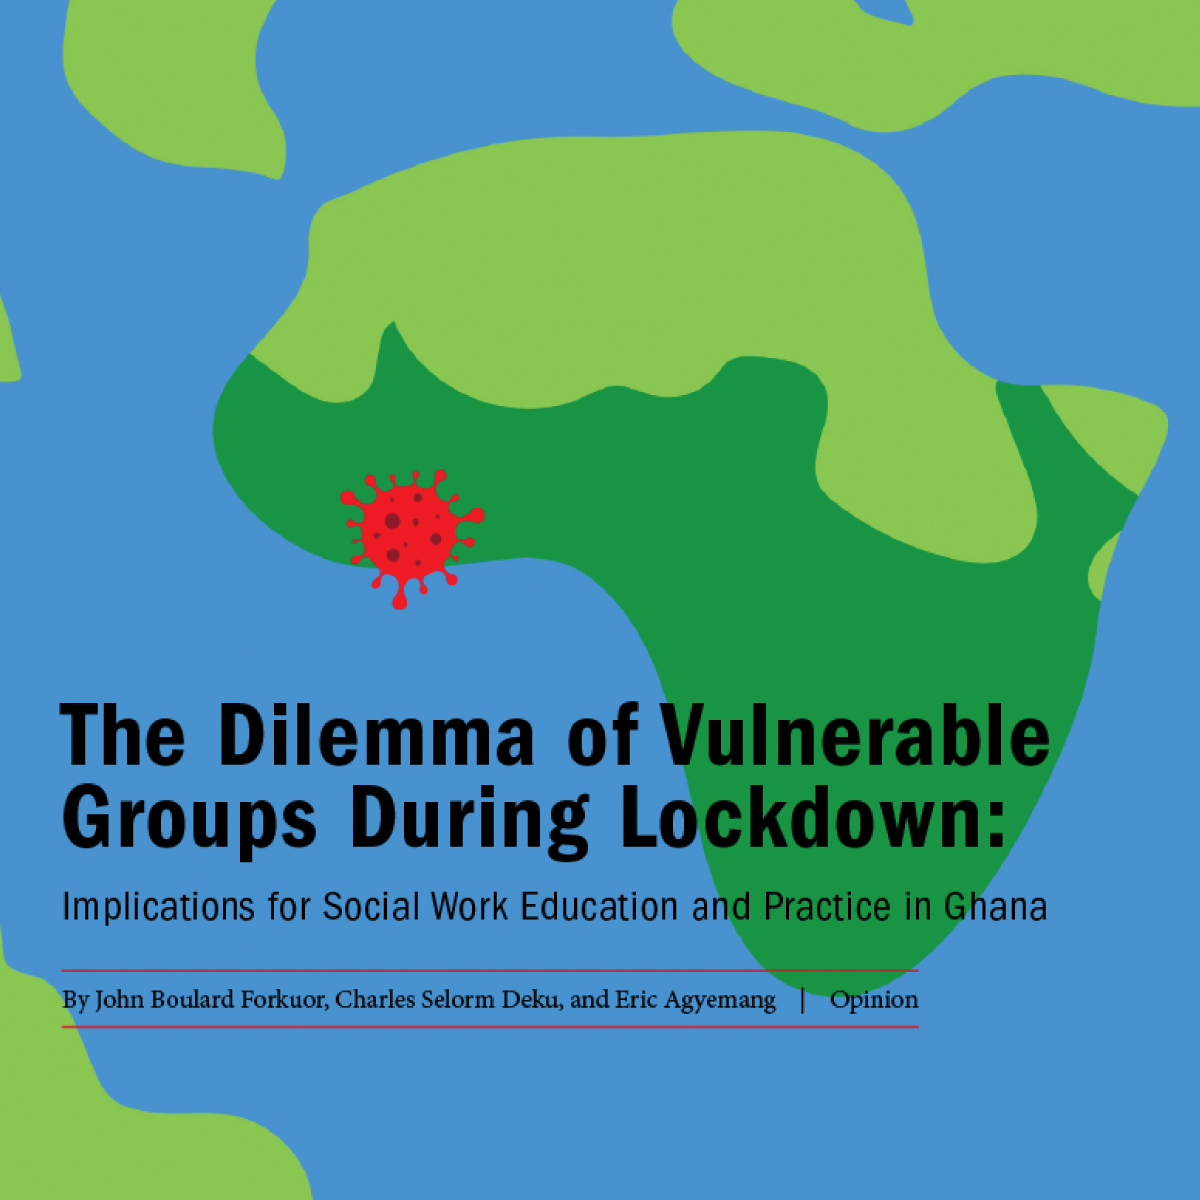 The Dilemma of Vulnerable Groups During Lockdown: Implications for Social Work Education and Practice in Ghana